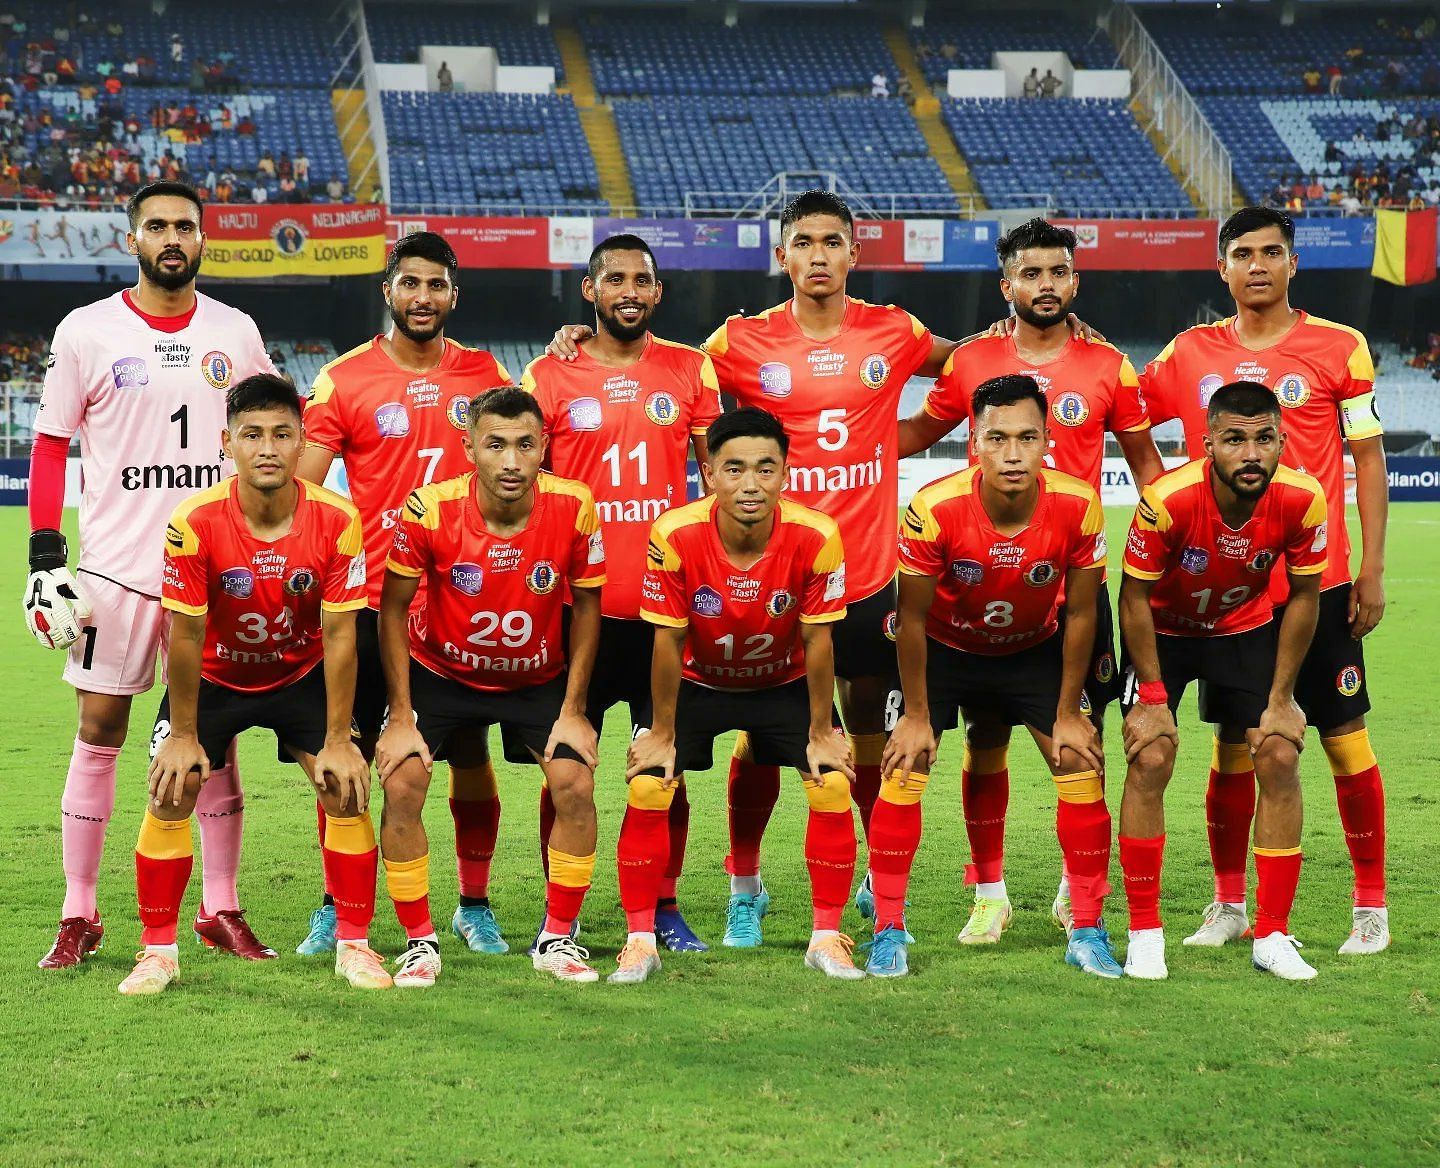 Emami East Bengal will be hoping to return to their glory days. (Image Courtesy: Twitter/@trakonly)